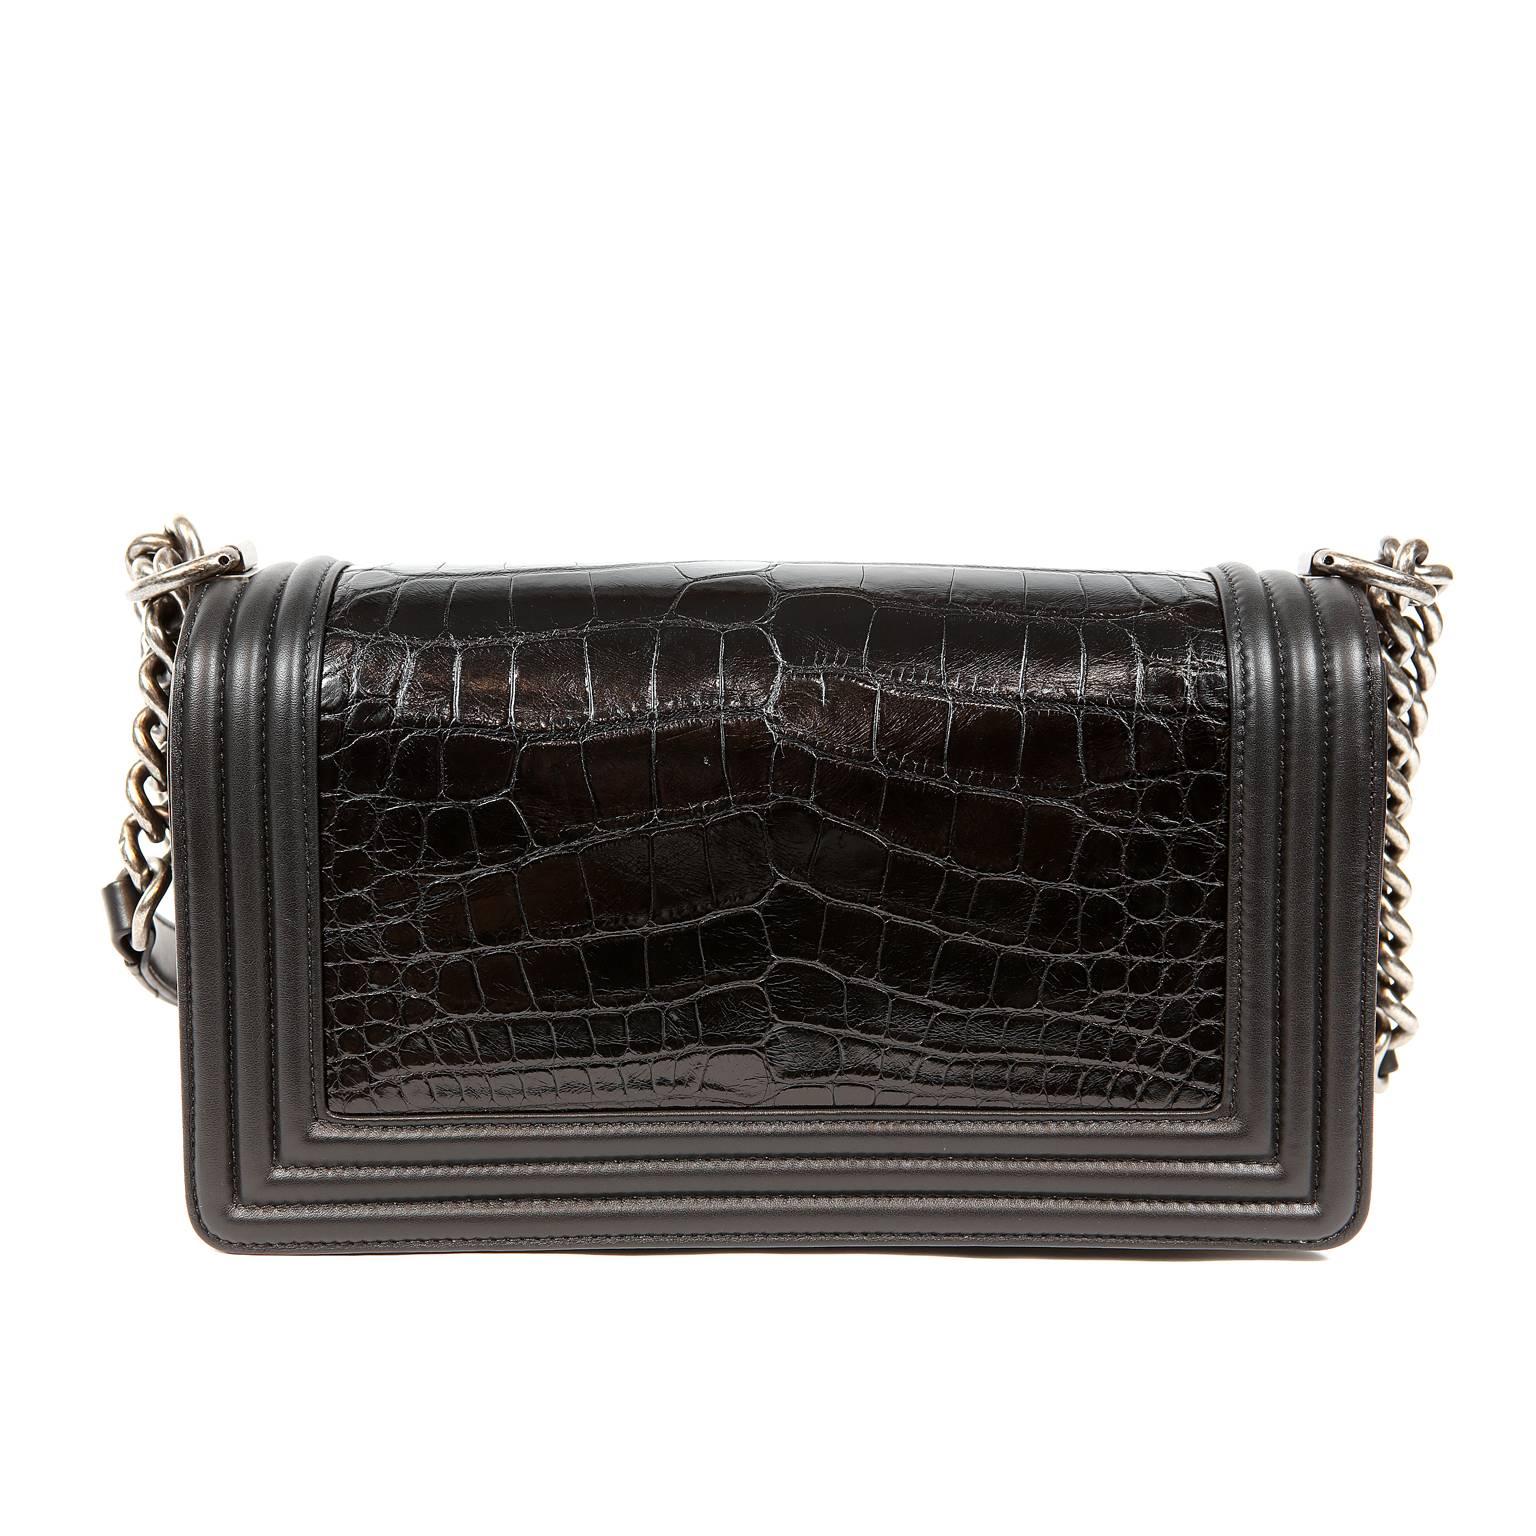 Chanel Black Crocodile Boy Bag- PRISTINE; appears never carried
The updated design is structured and edgy with a versatility that makes it extremely popular.  The exotic versions are extremely rare and considered highly collectible.
Black crocodile